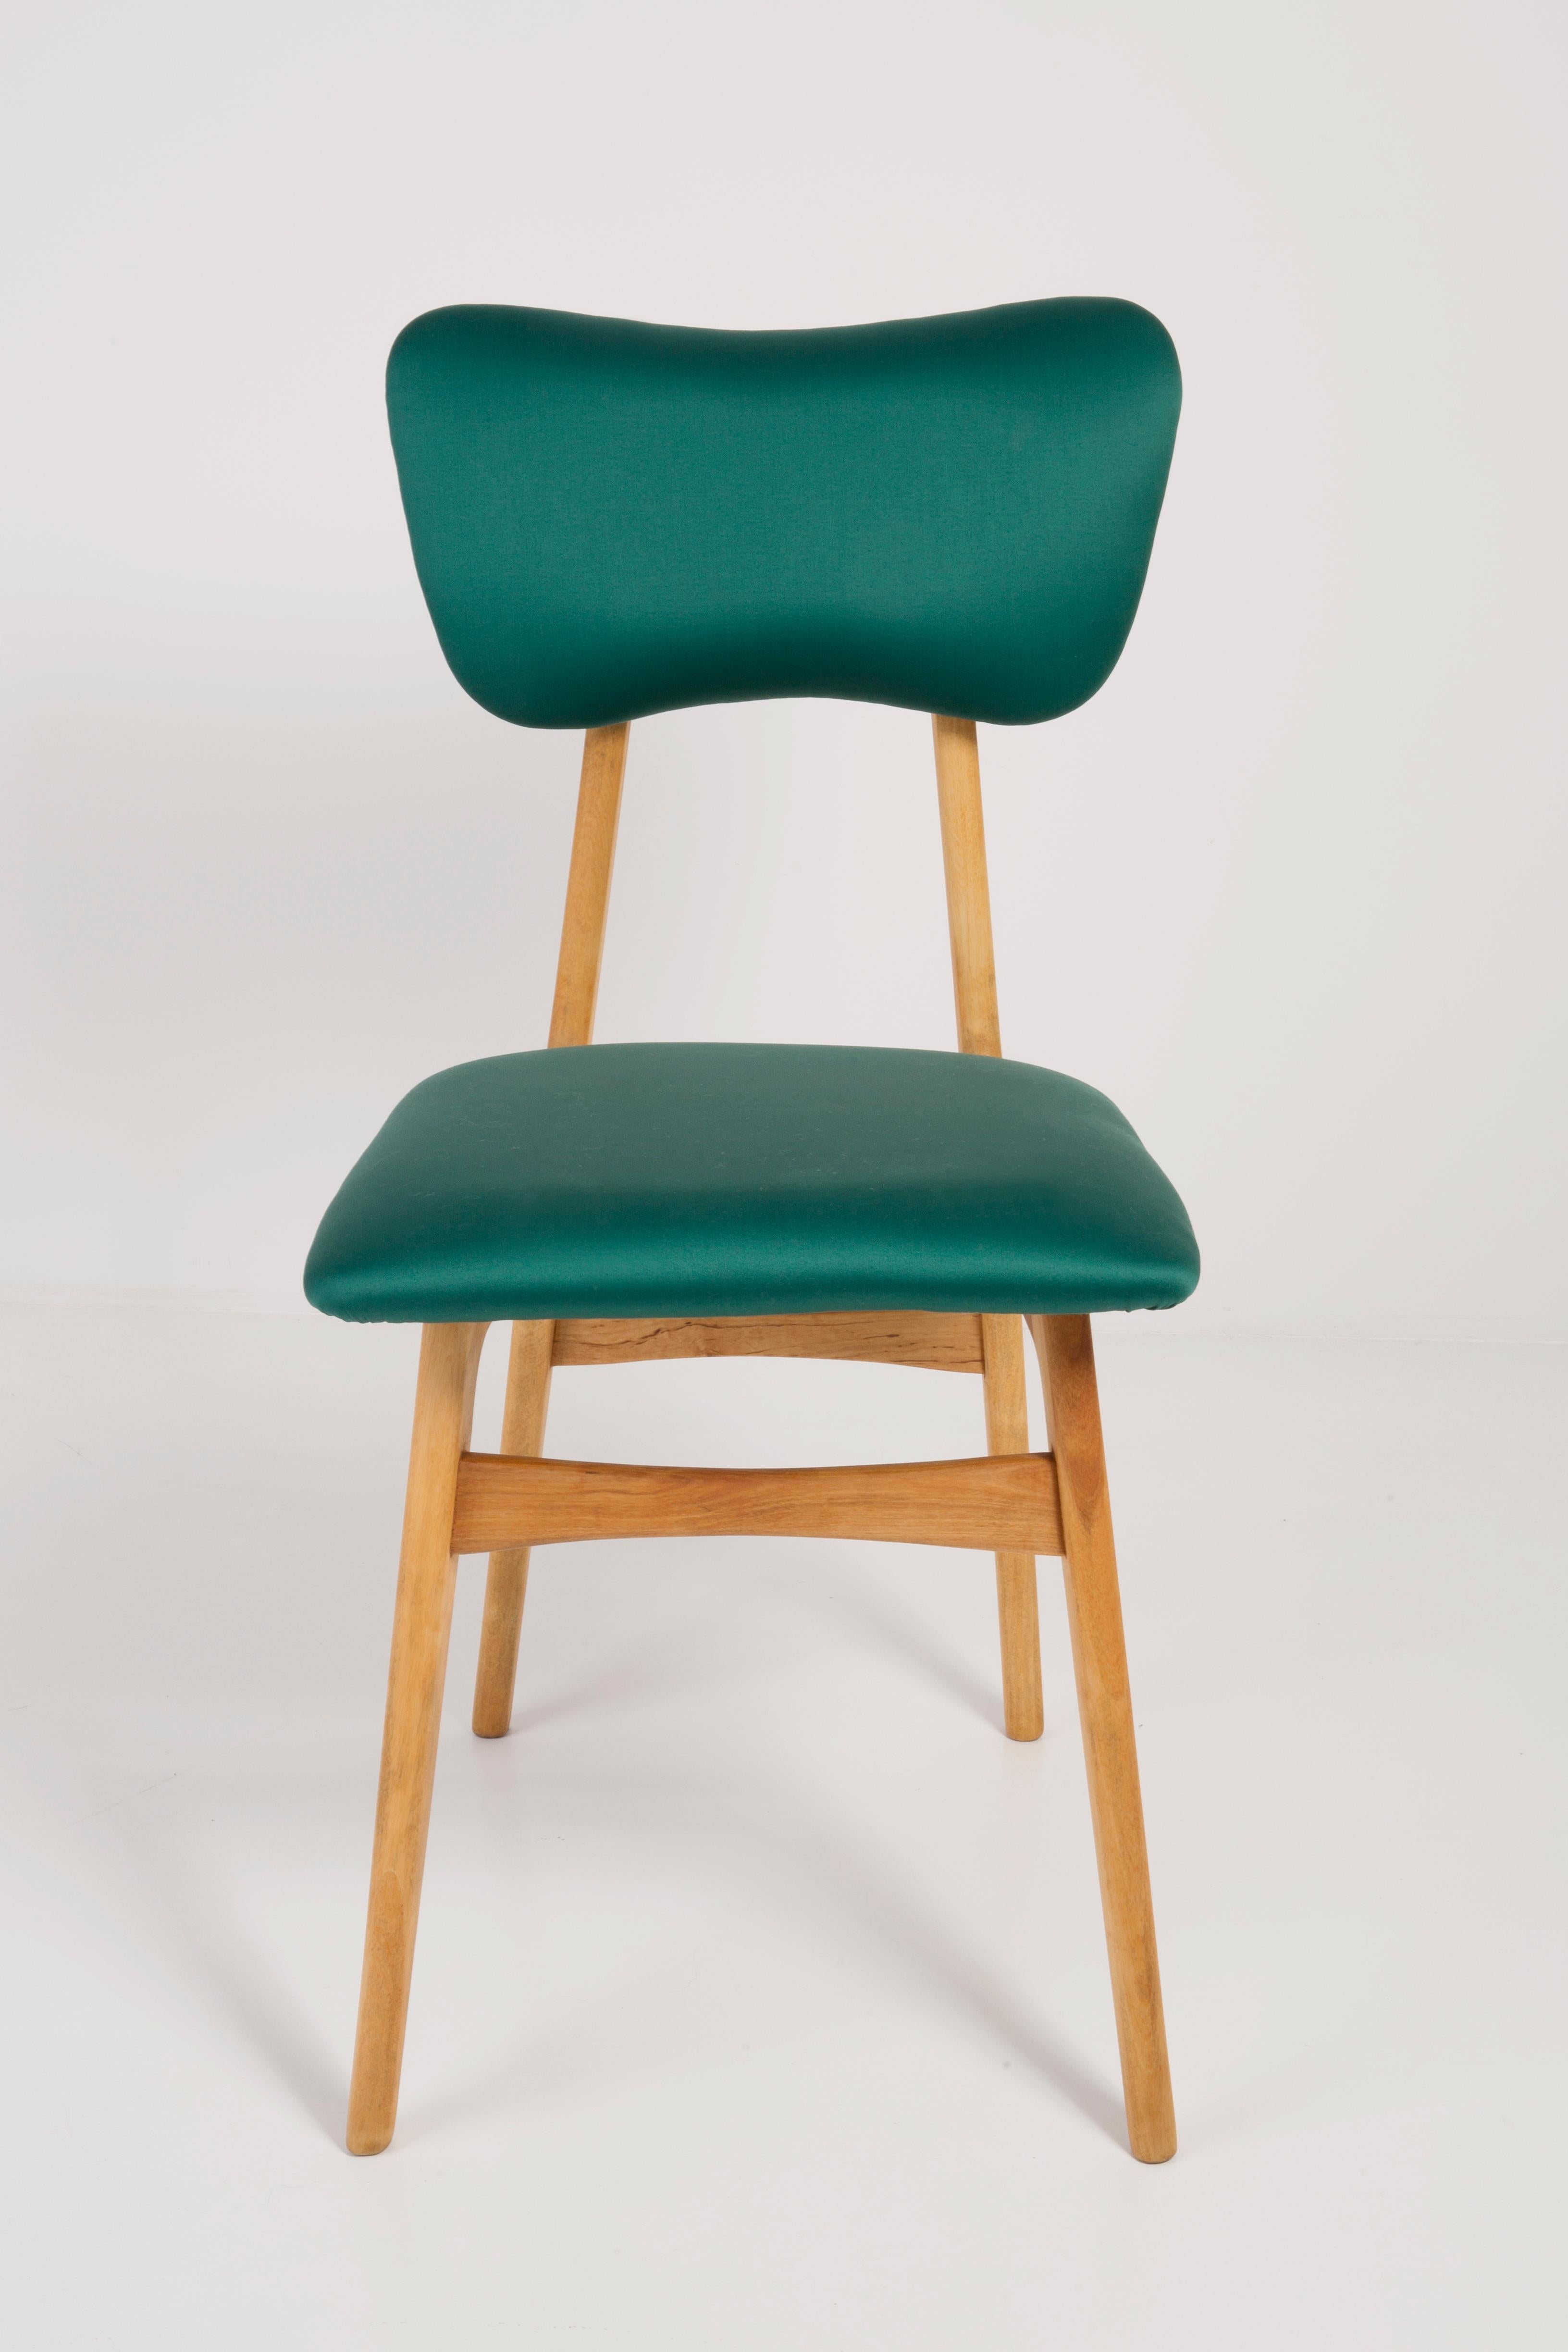 Chair designed by Prof. Rajmund Halas. Made of beechwood. Chair is after a complete upholstery renovation, the woodwork has been refreshed. Seat and back is dressed in green, beautiful, high quality Dedar Tabularasa fabric. Tablarasa is an elegantly